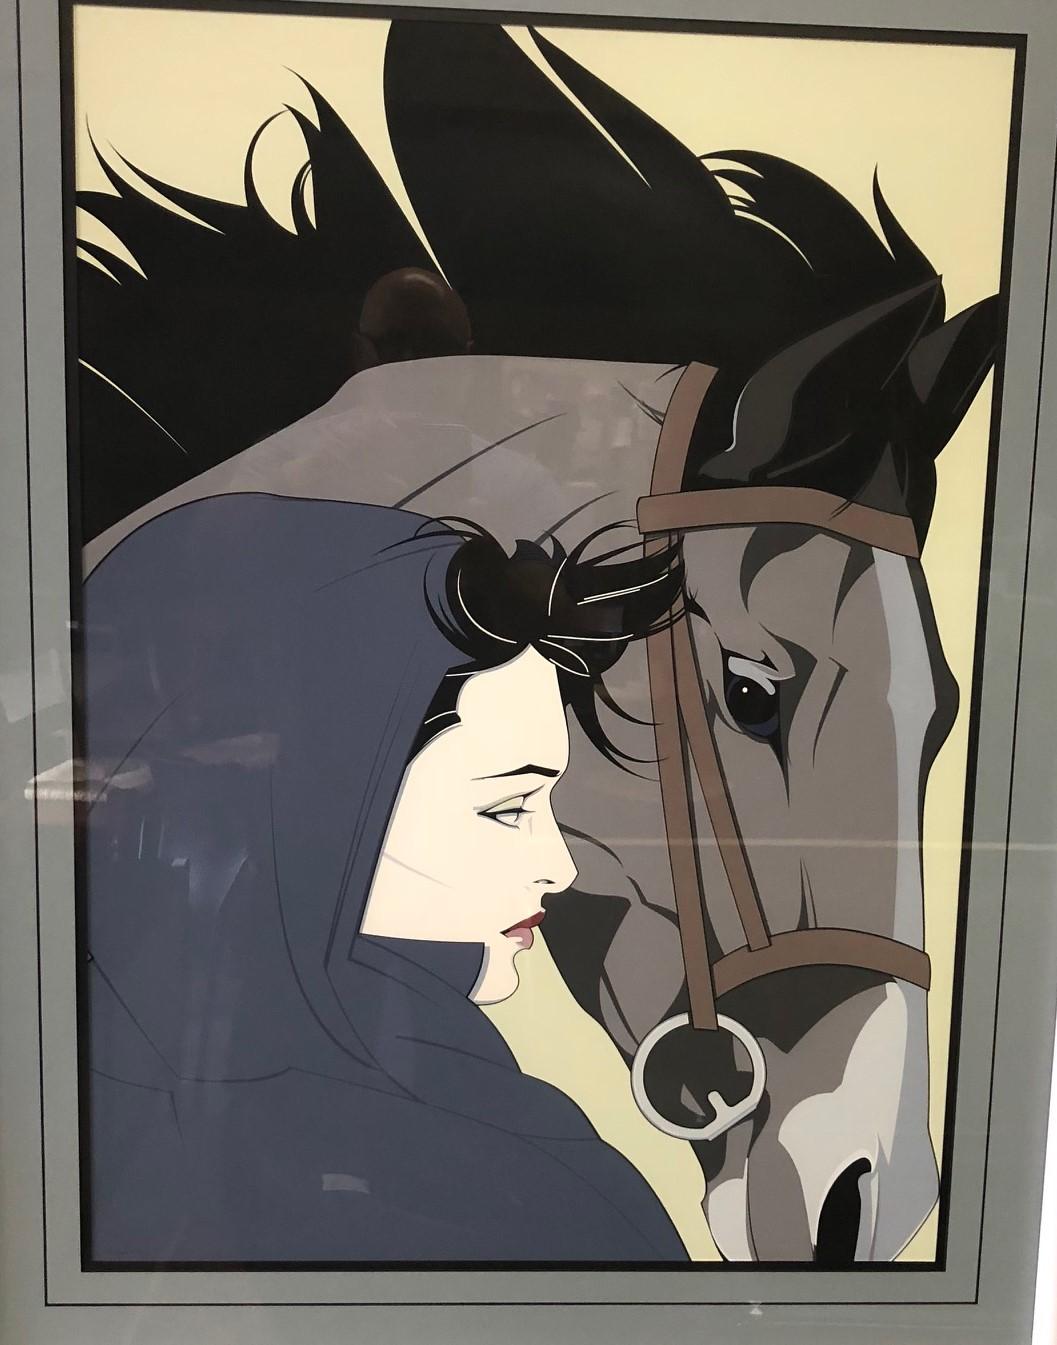 Limited edition serigraph (silkscreen) by Patrick Nagel published by Mirage Editions, Santa Monica, CA, circa early 1980s.

Patrick Nagel was an American artist who did work for Playboy magazine throughout the 1980s. He created popular